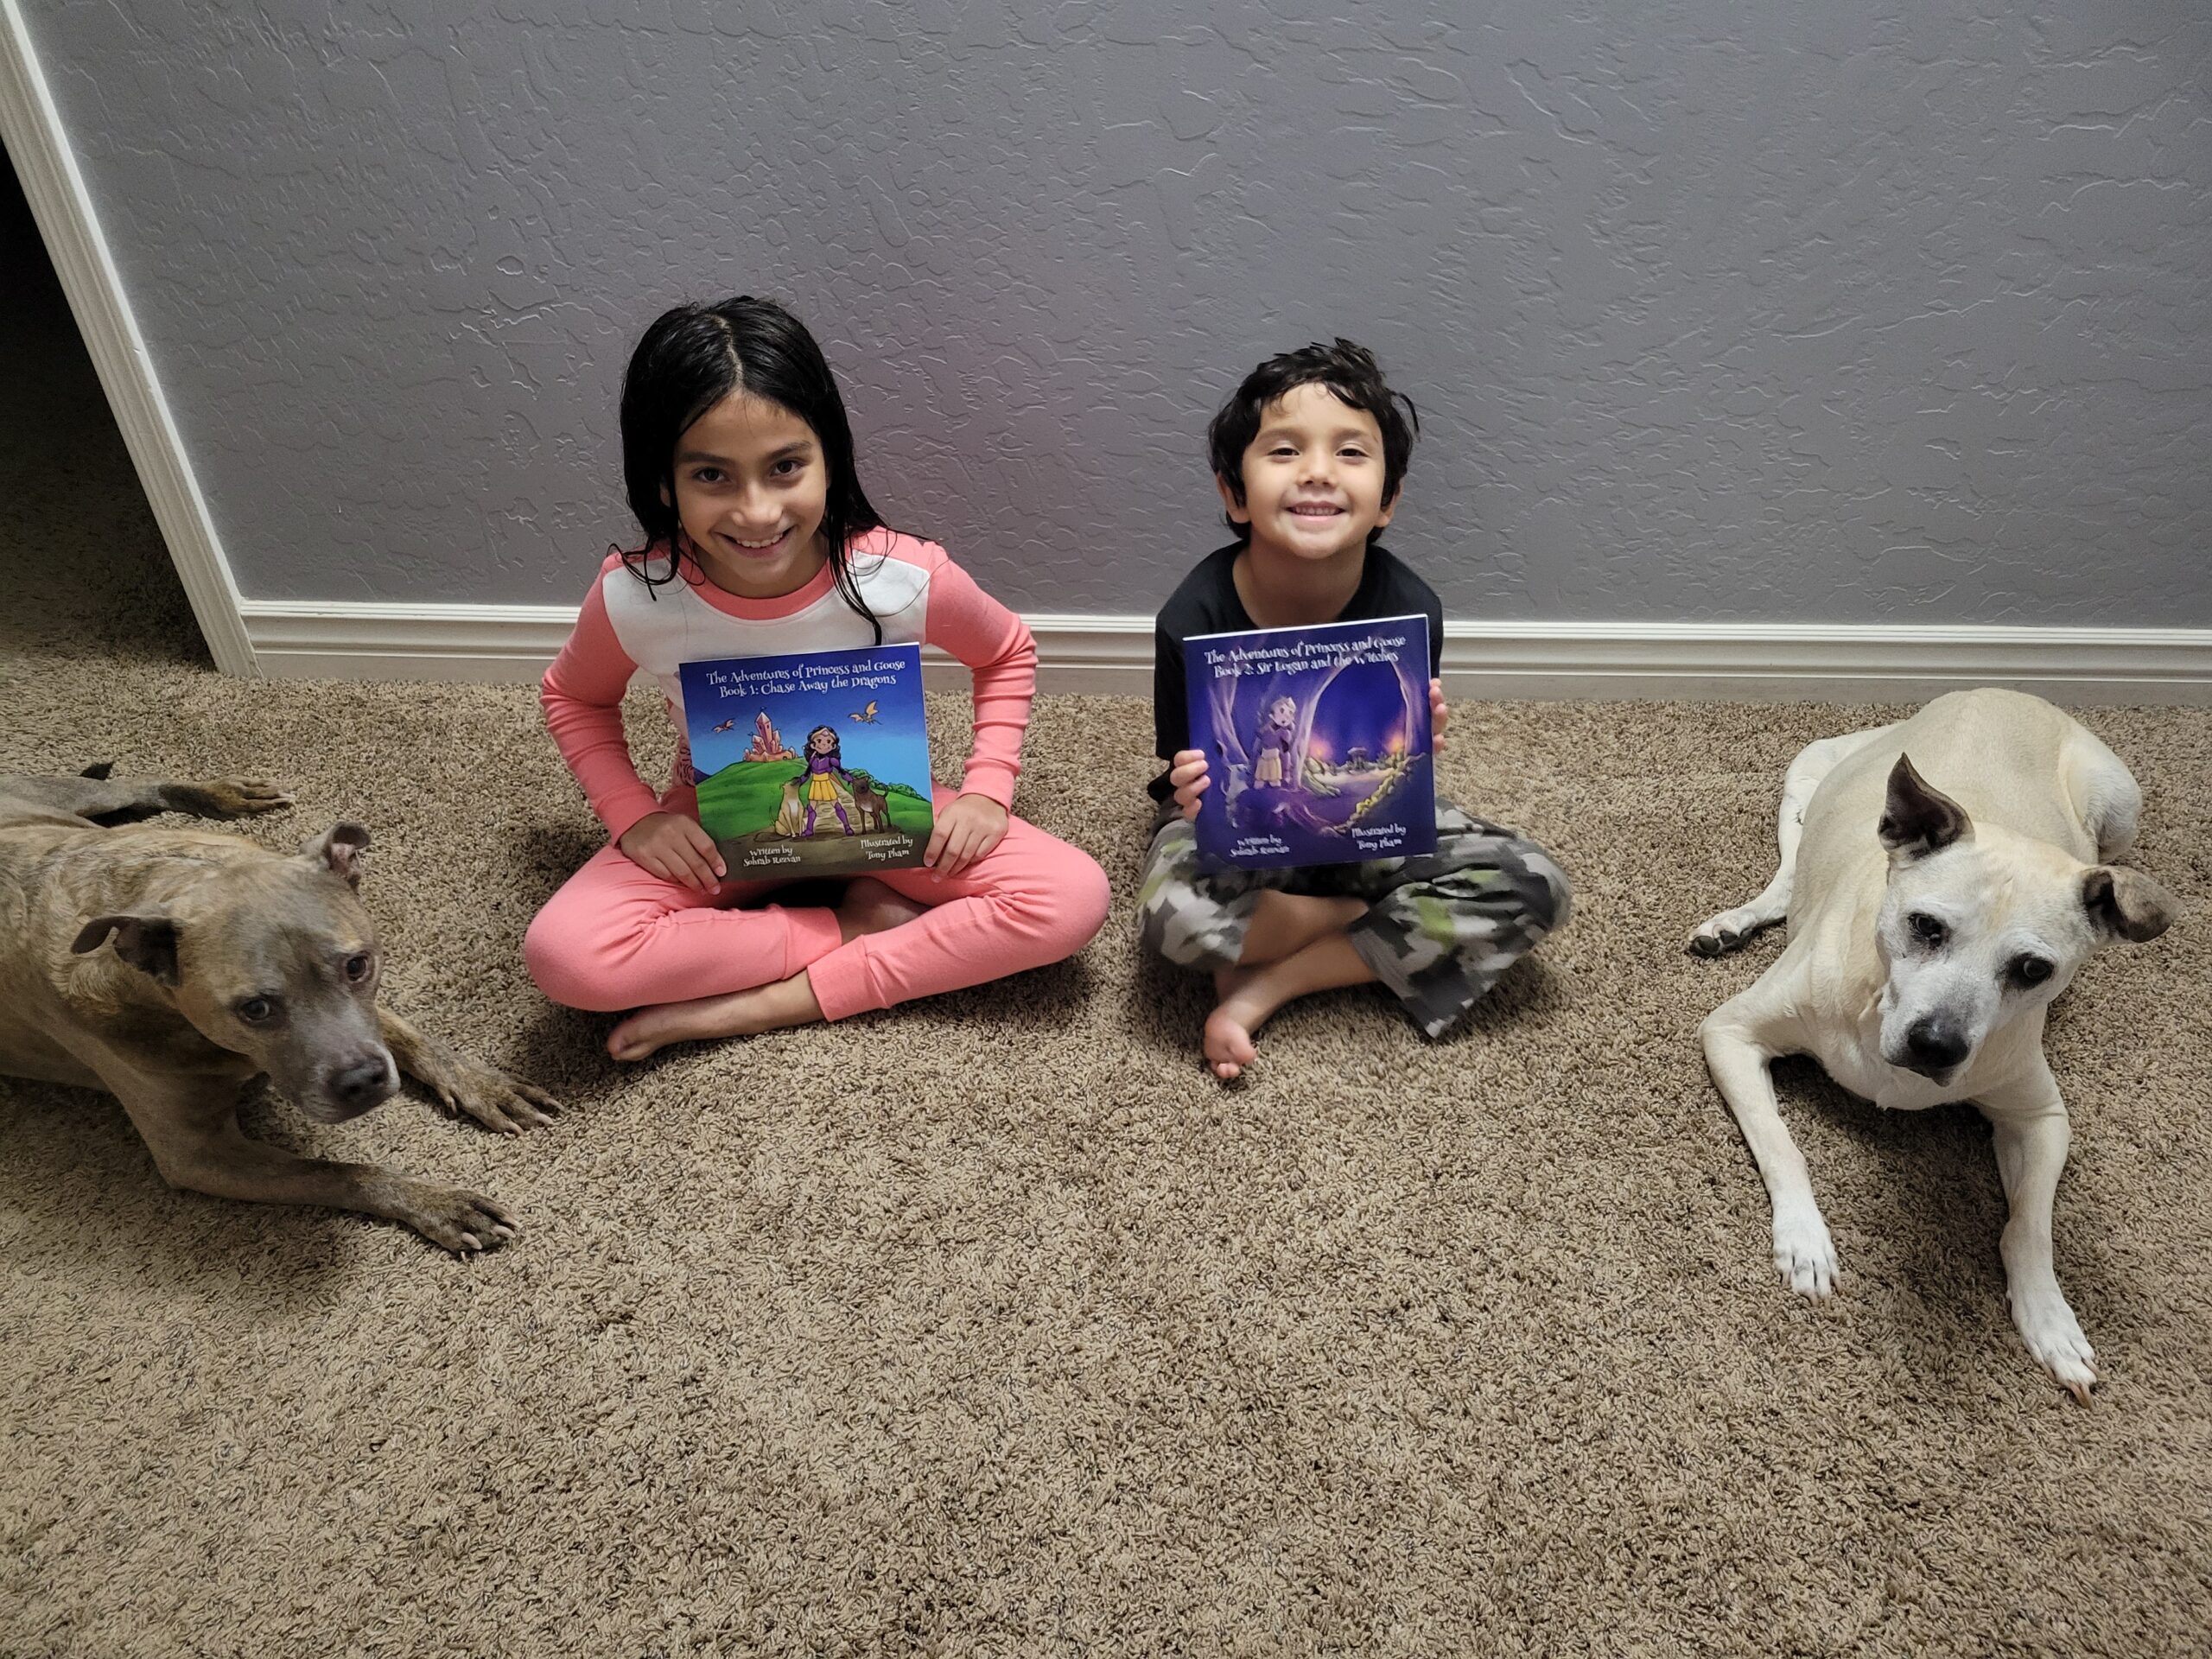 Family with Book 1 and Book 2